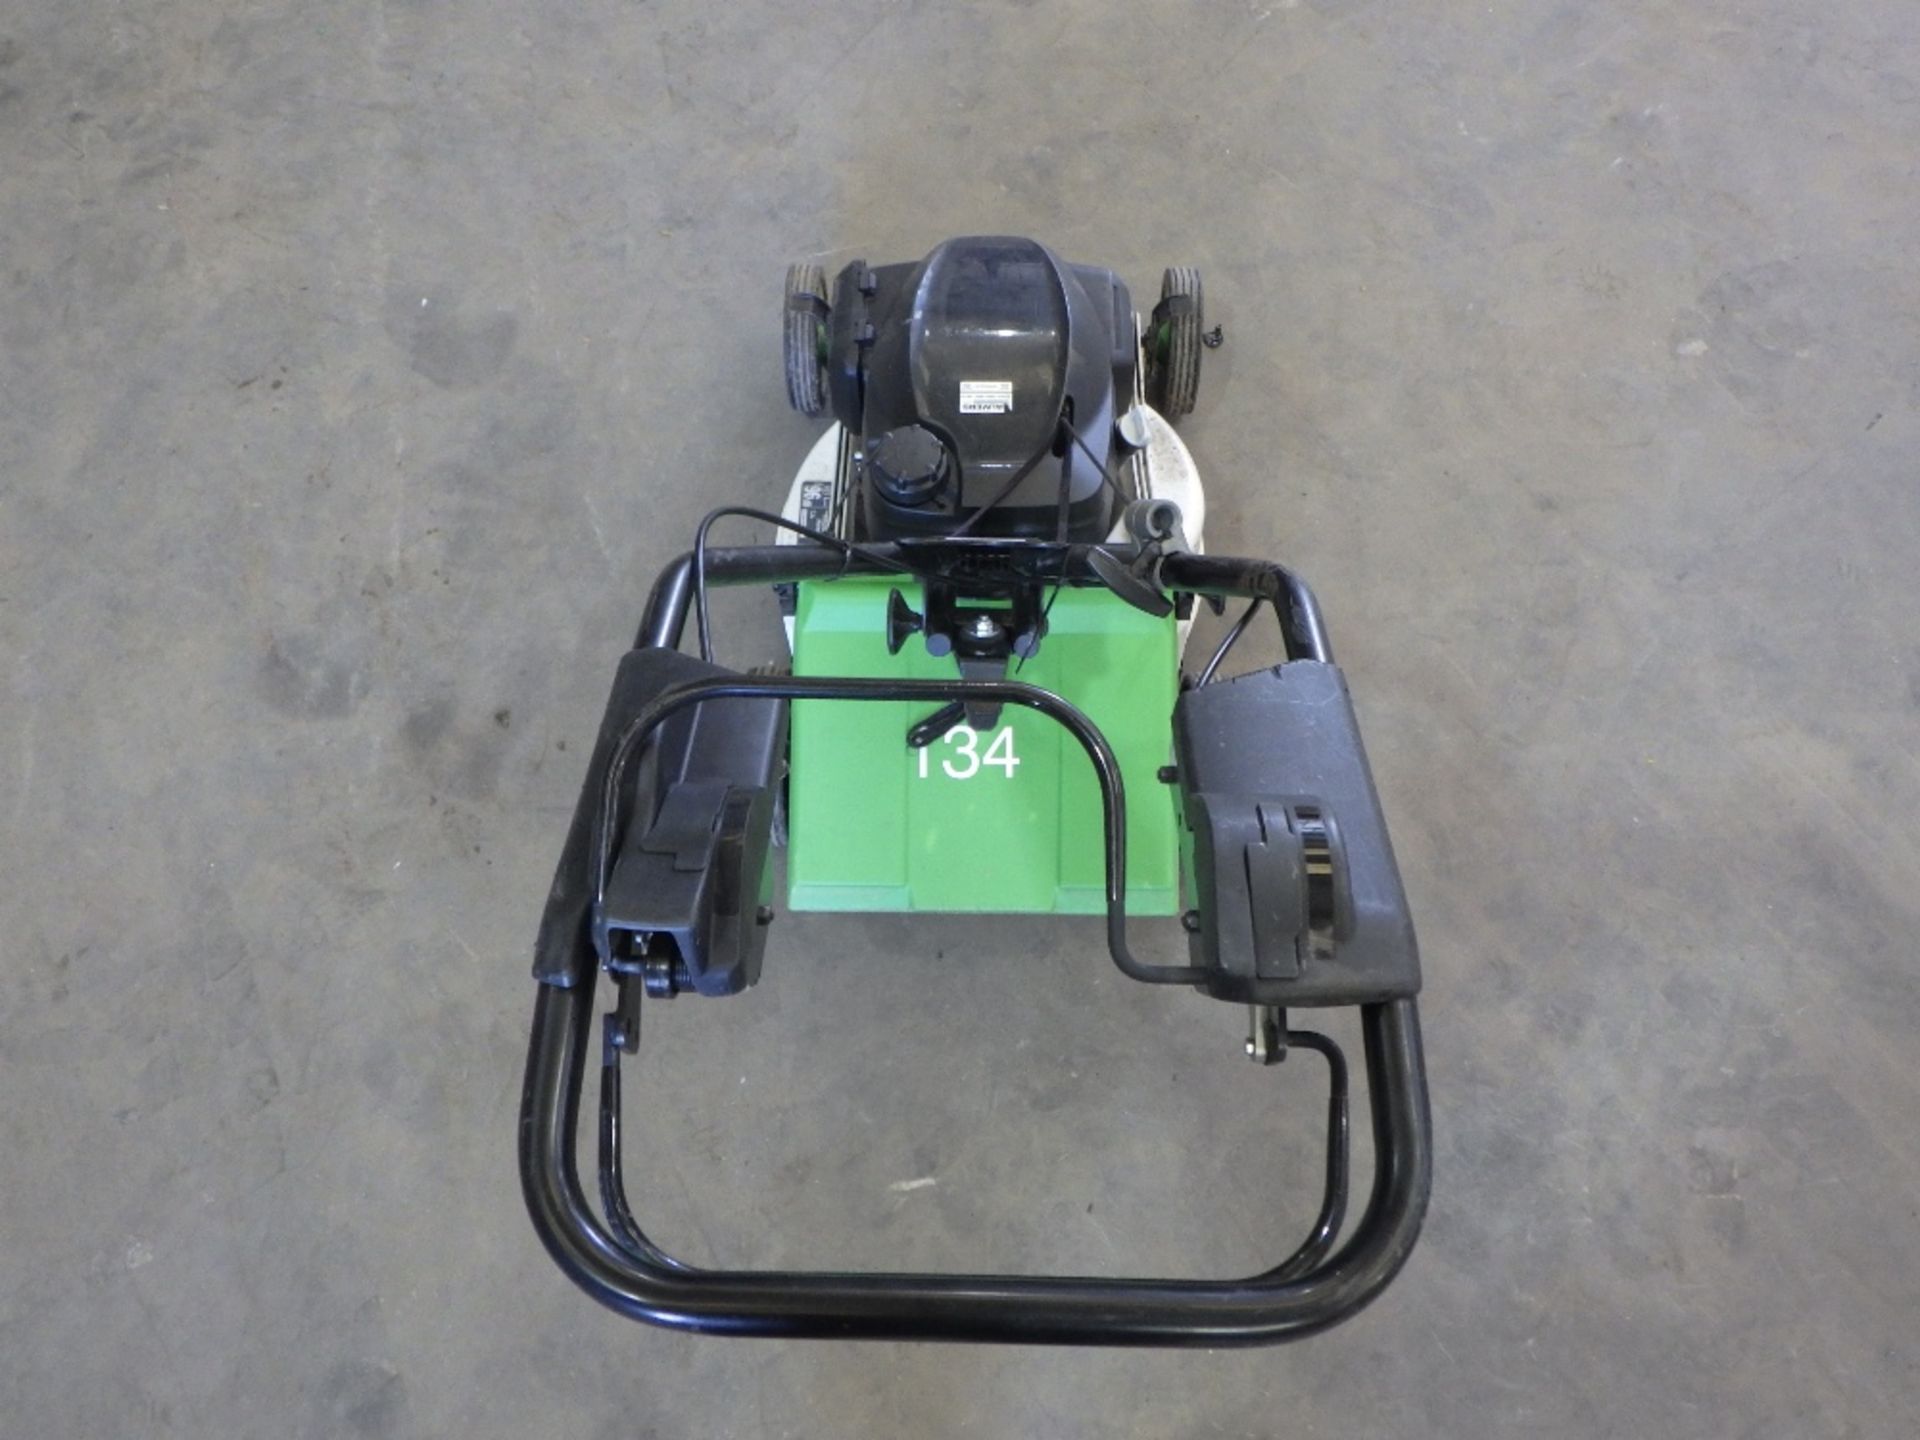 ETESIA PHTS3 LAWN MOWER - Image 3 of 4